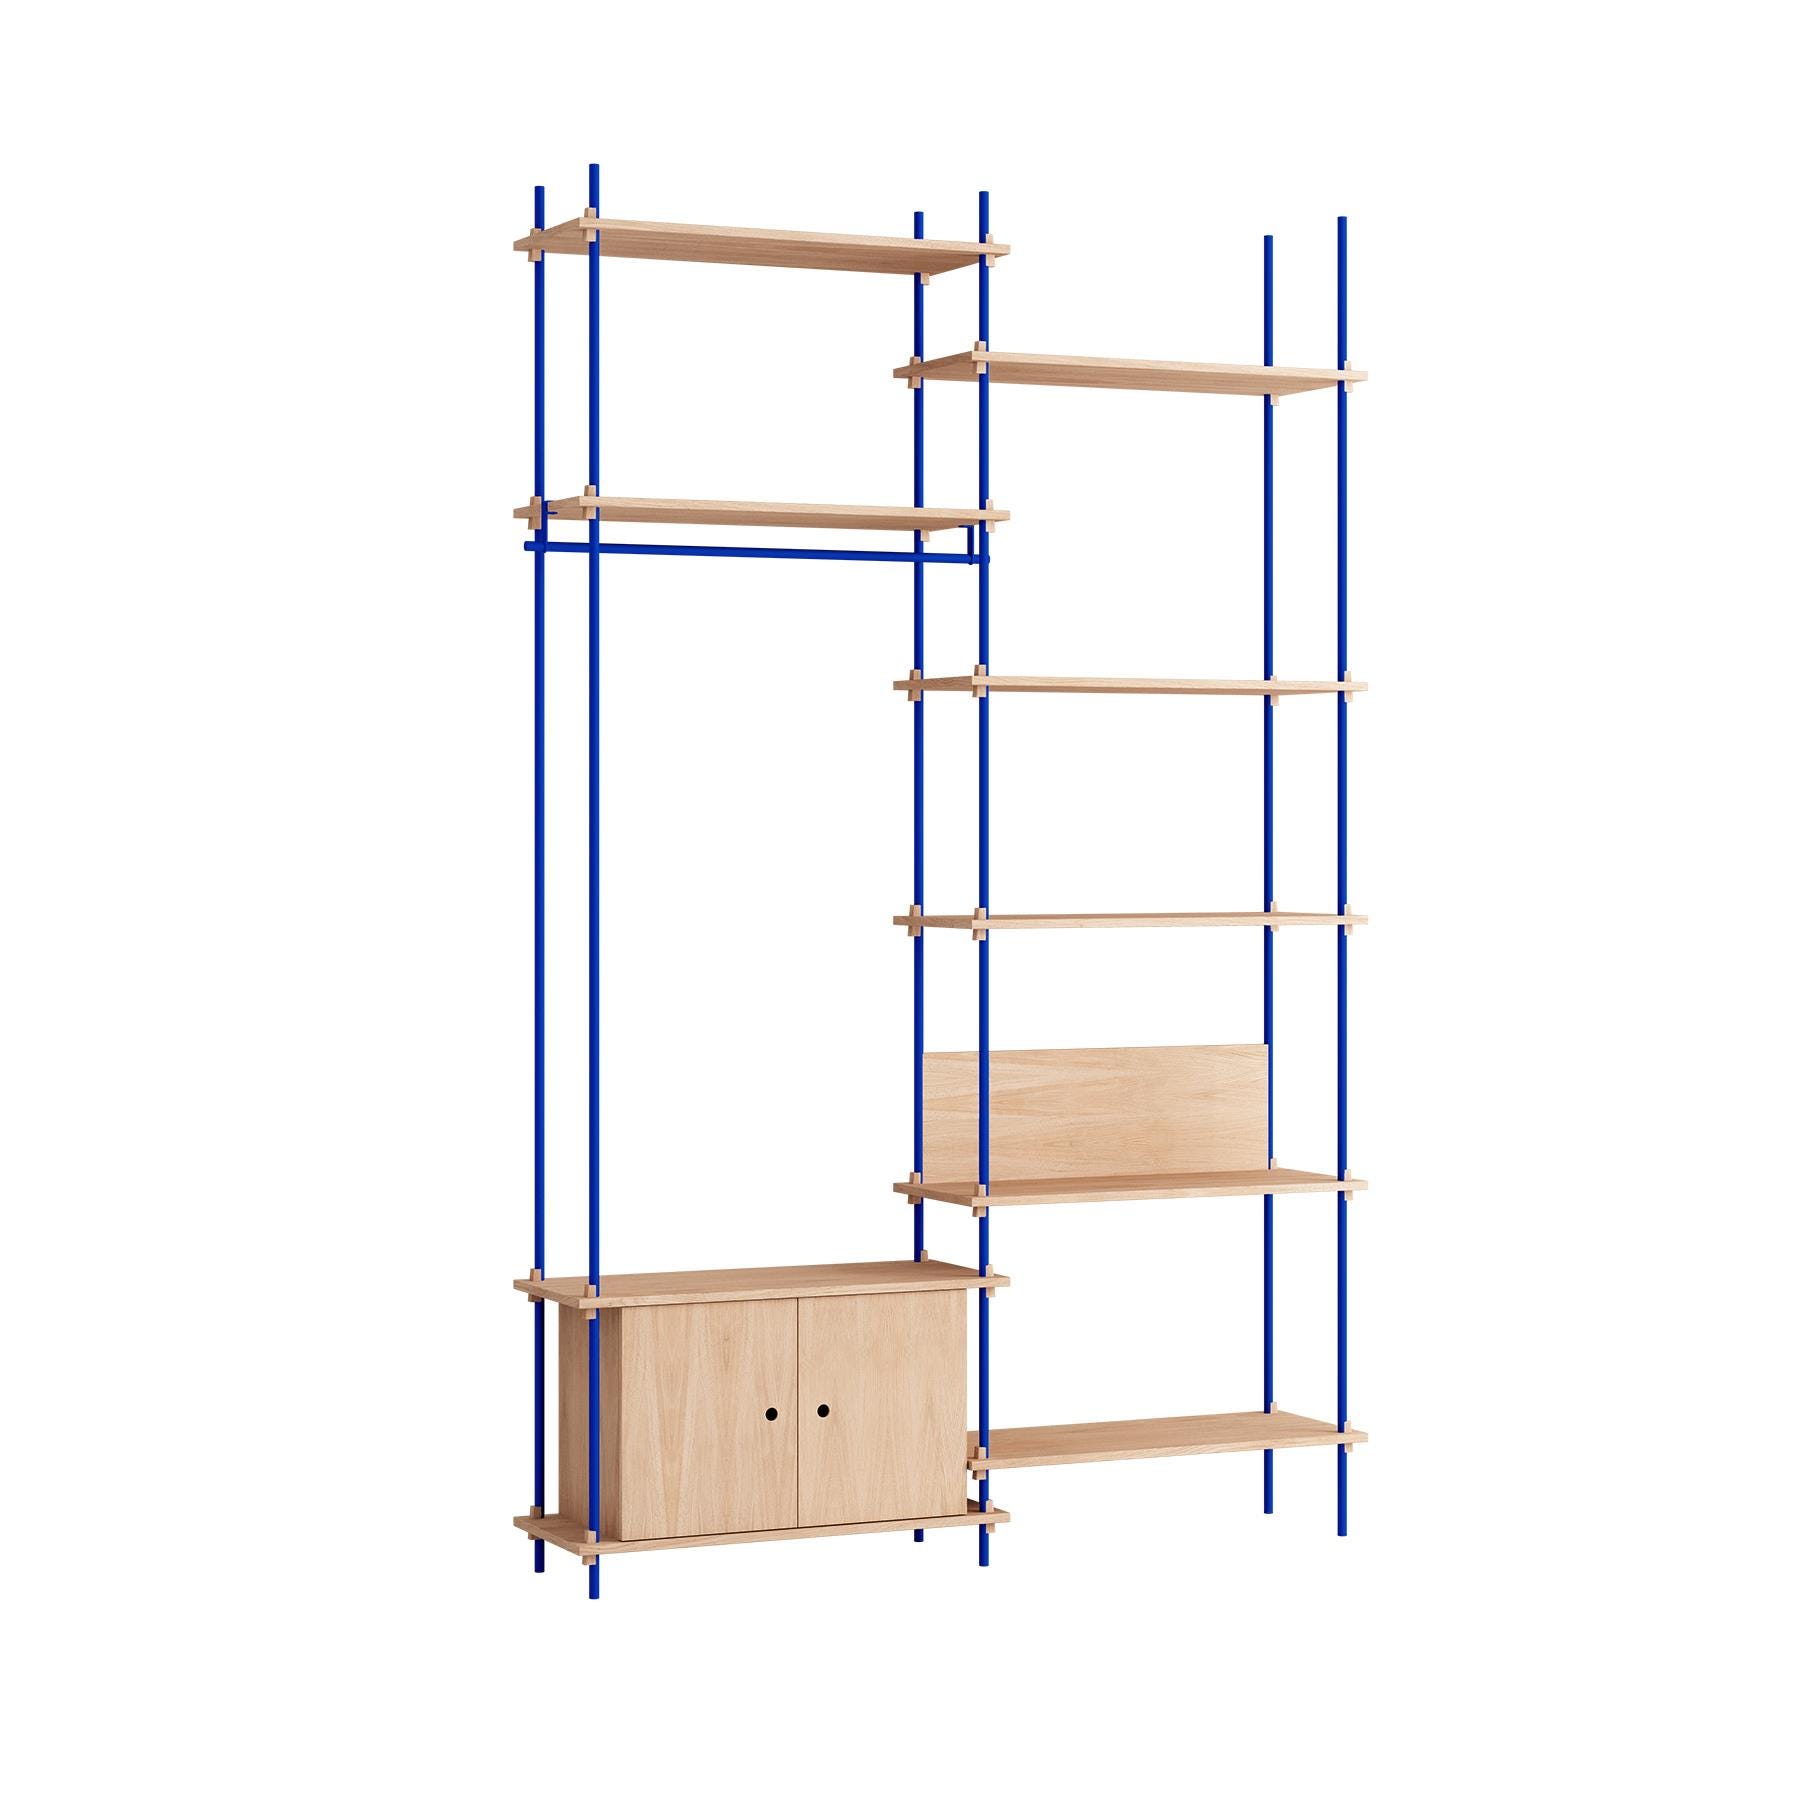 Moebe Double Shelving System 1 Cabinet Desk And Clothes Rail Oak Blue Light Wood Designer Furniture From Holloways Of Ludlow